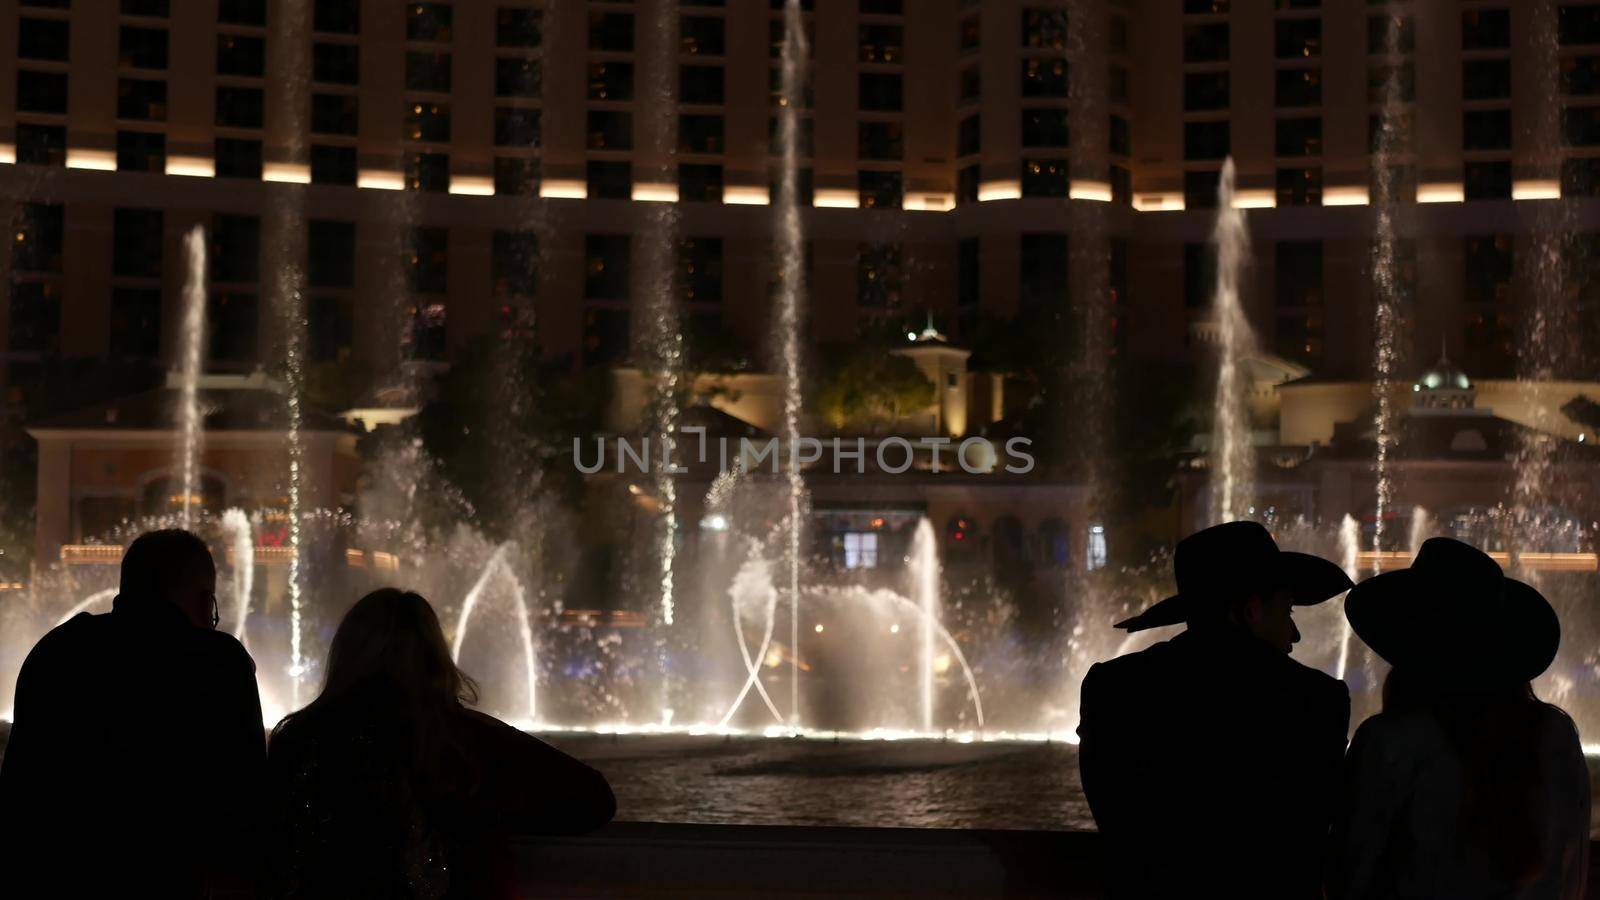 LAS VEGAS, NEVADA USA - 13 DEC 2019: People looking at Bellagio fountain musical performance at night. Contrast silhouettes and glowing dancing splashing water. Entertainment show in gambling city by DogoraSun